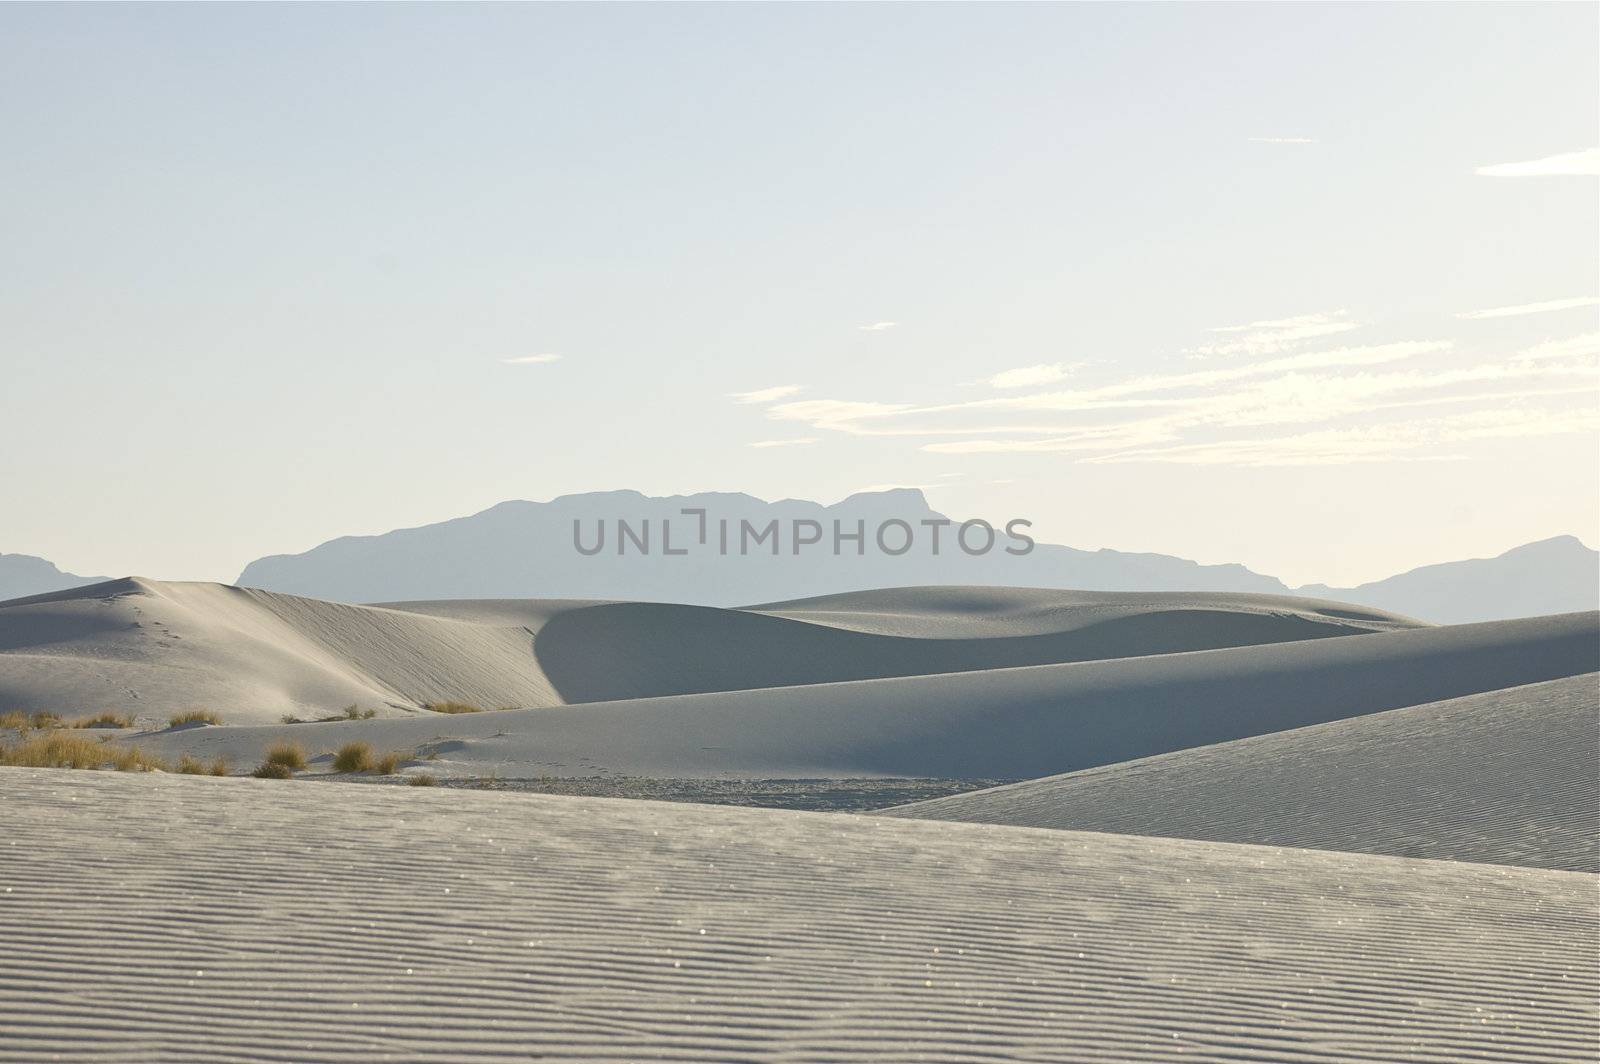 White Sands National Monument at sunset, featuring hills and dunes against the horizon, New Mexico